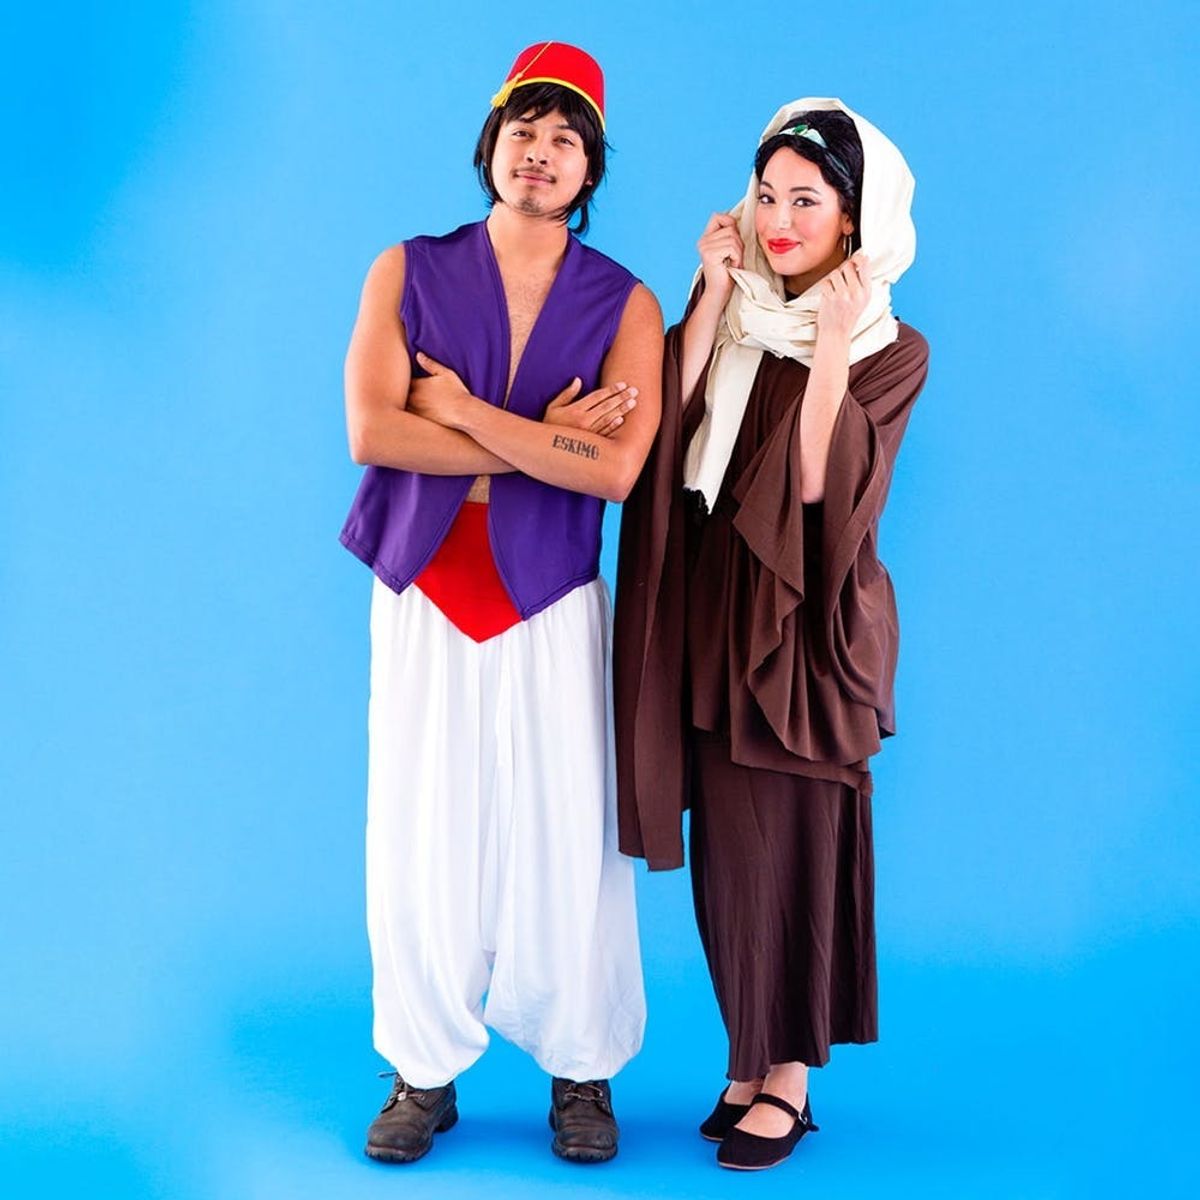 Go for a Magic Carpet Ride With This Aladdin Halloween Costume